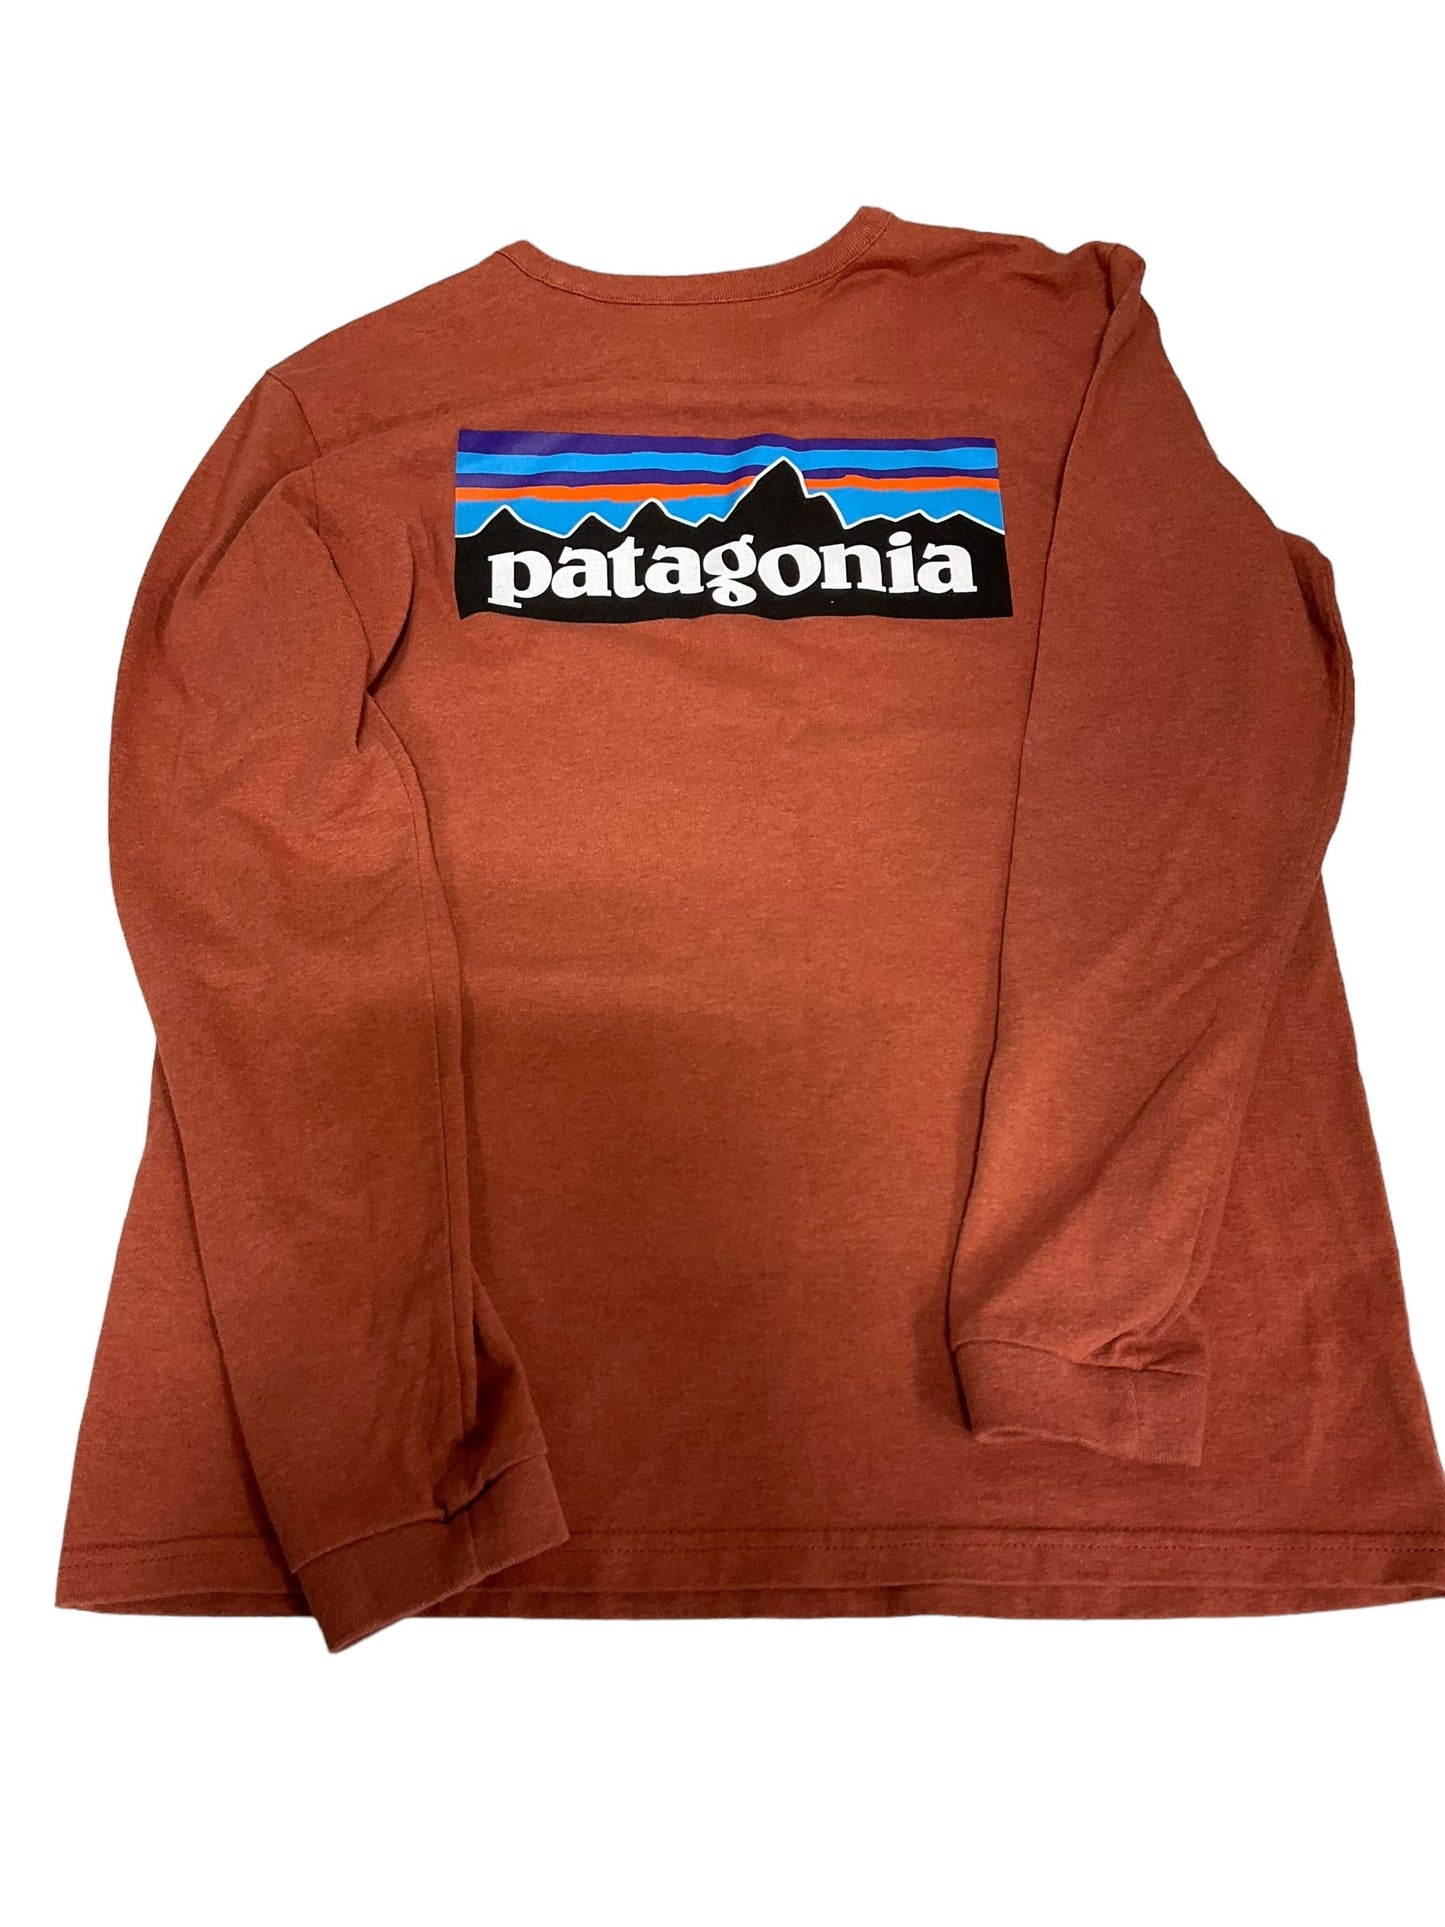 Clay Athletic Top Long Sleeve Collar Patagonia, Size Xs